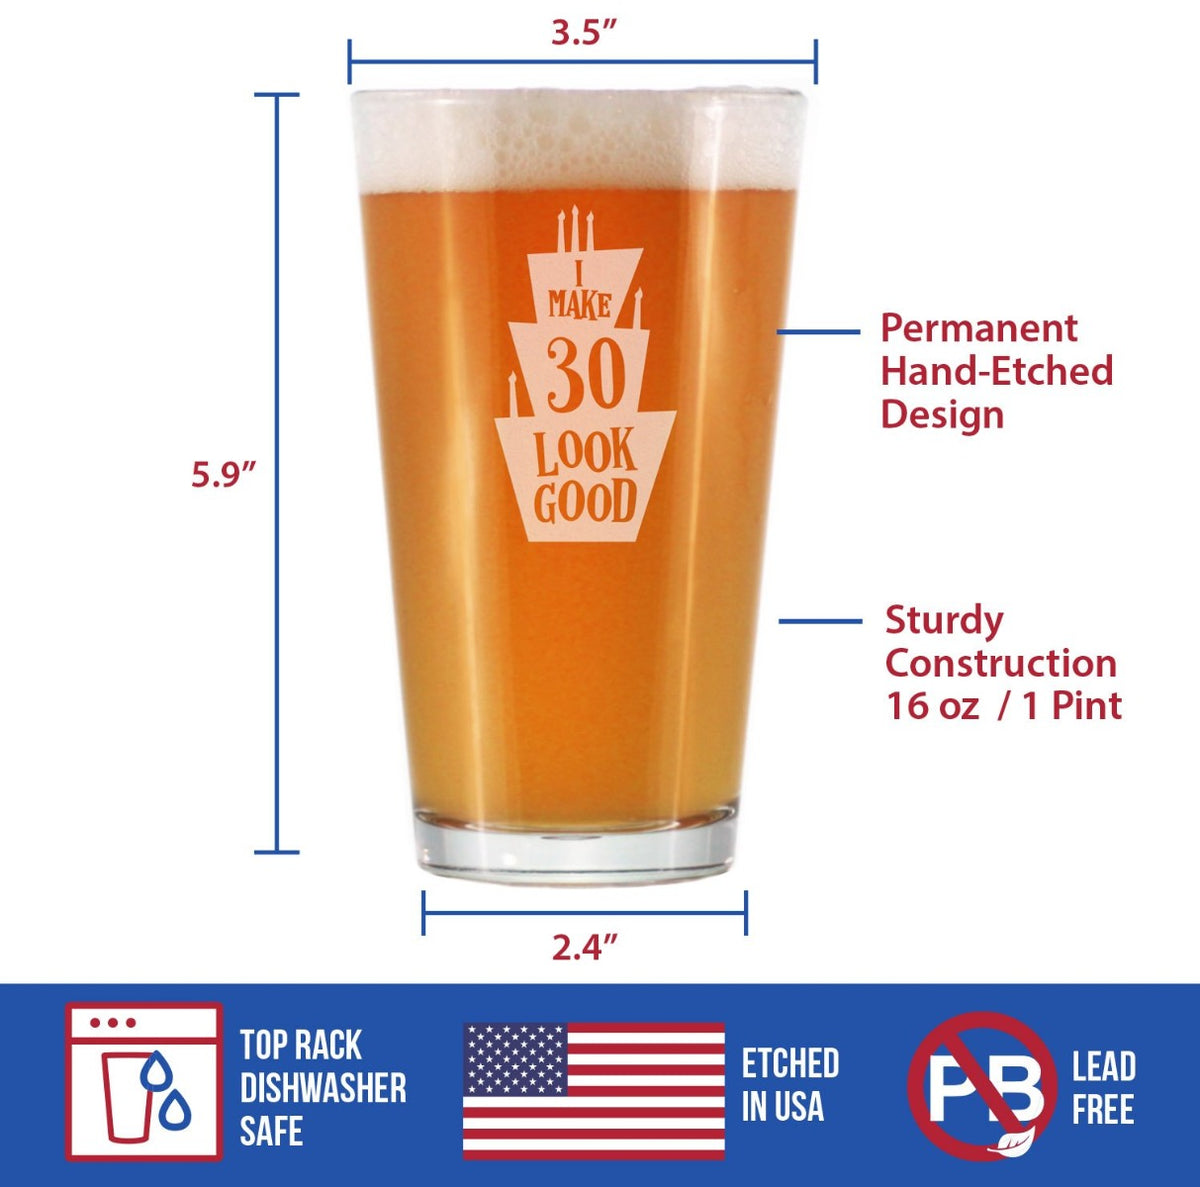 Make 30 Look Good - Funny 16 oz Pint Glass for Beer - 30th Birthday Gifts for Men or Women Turning 30 - Bday Party Decor